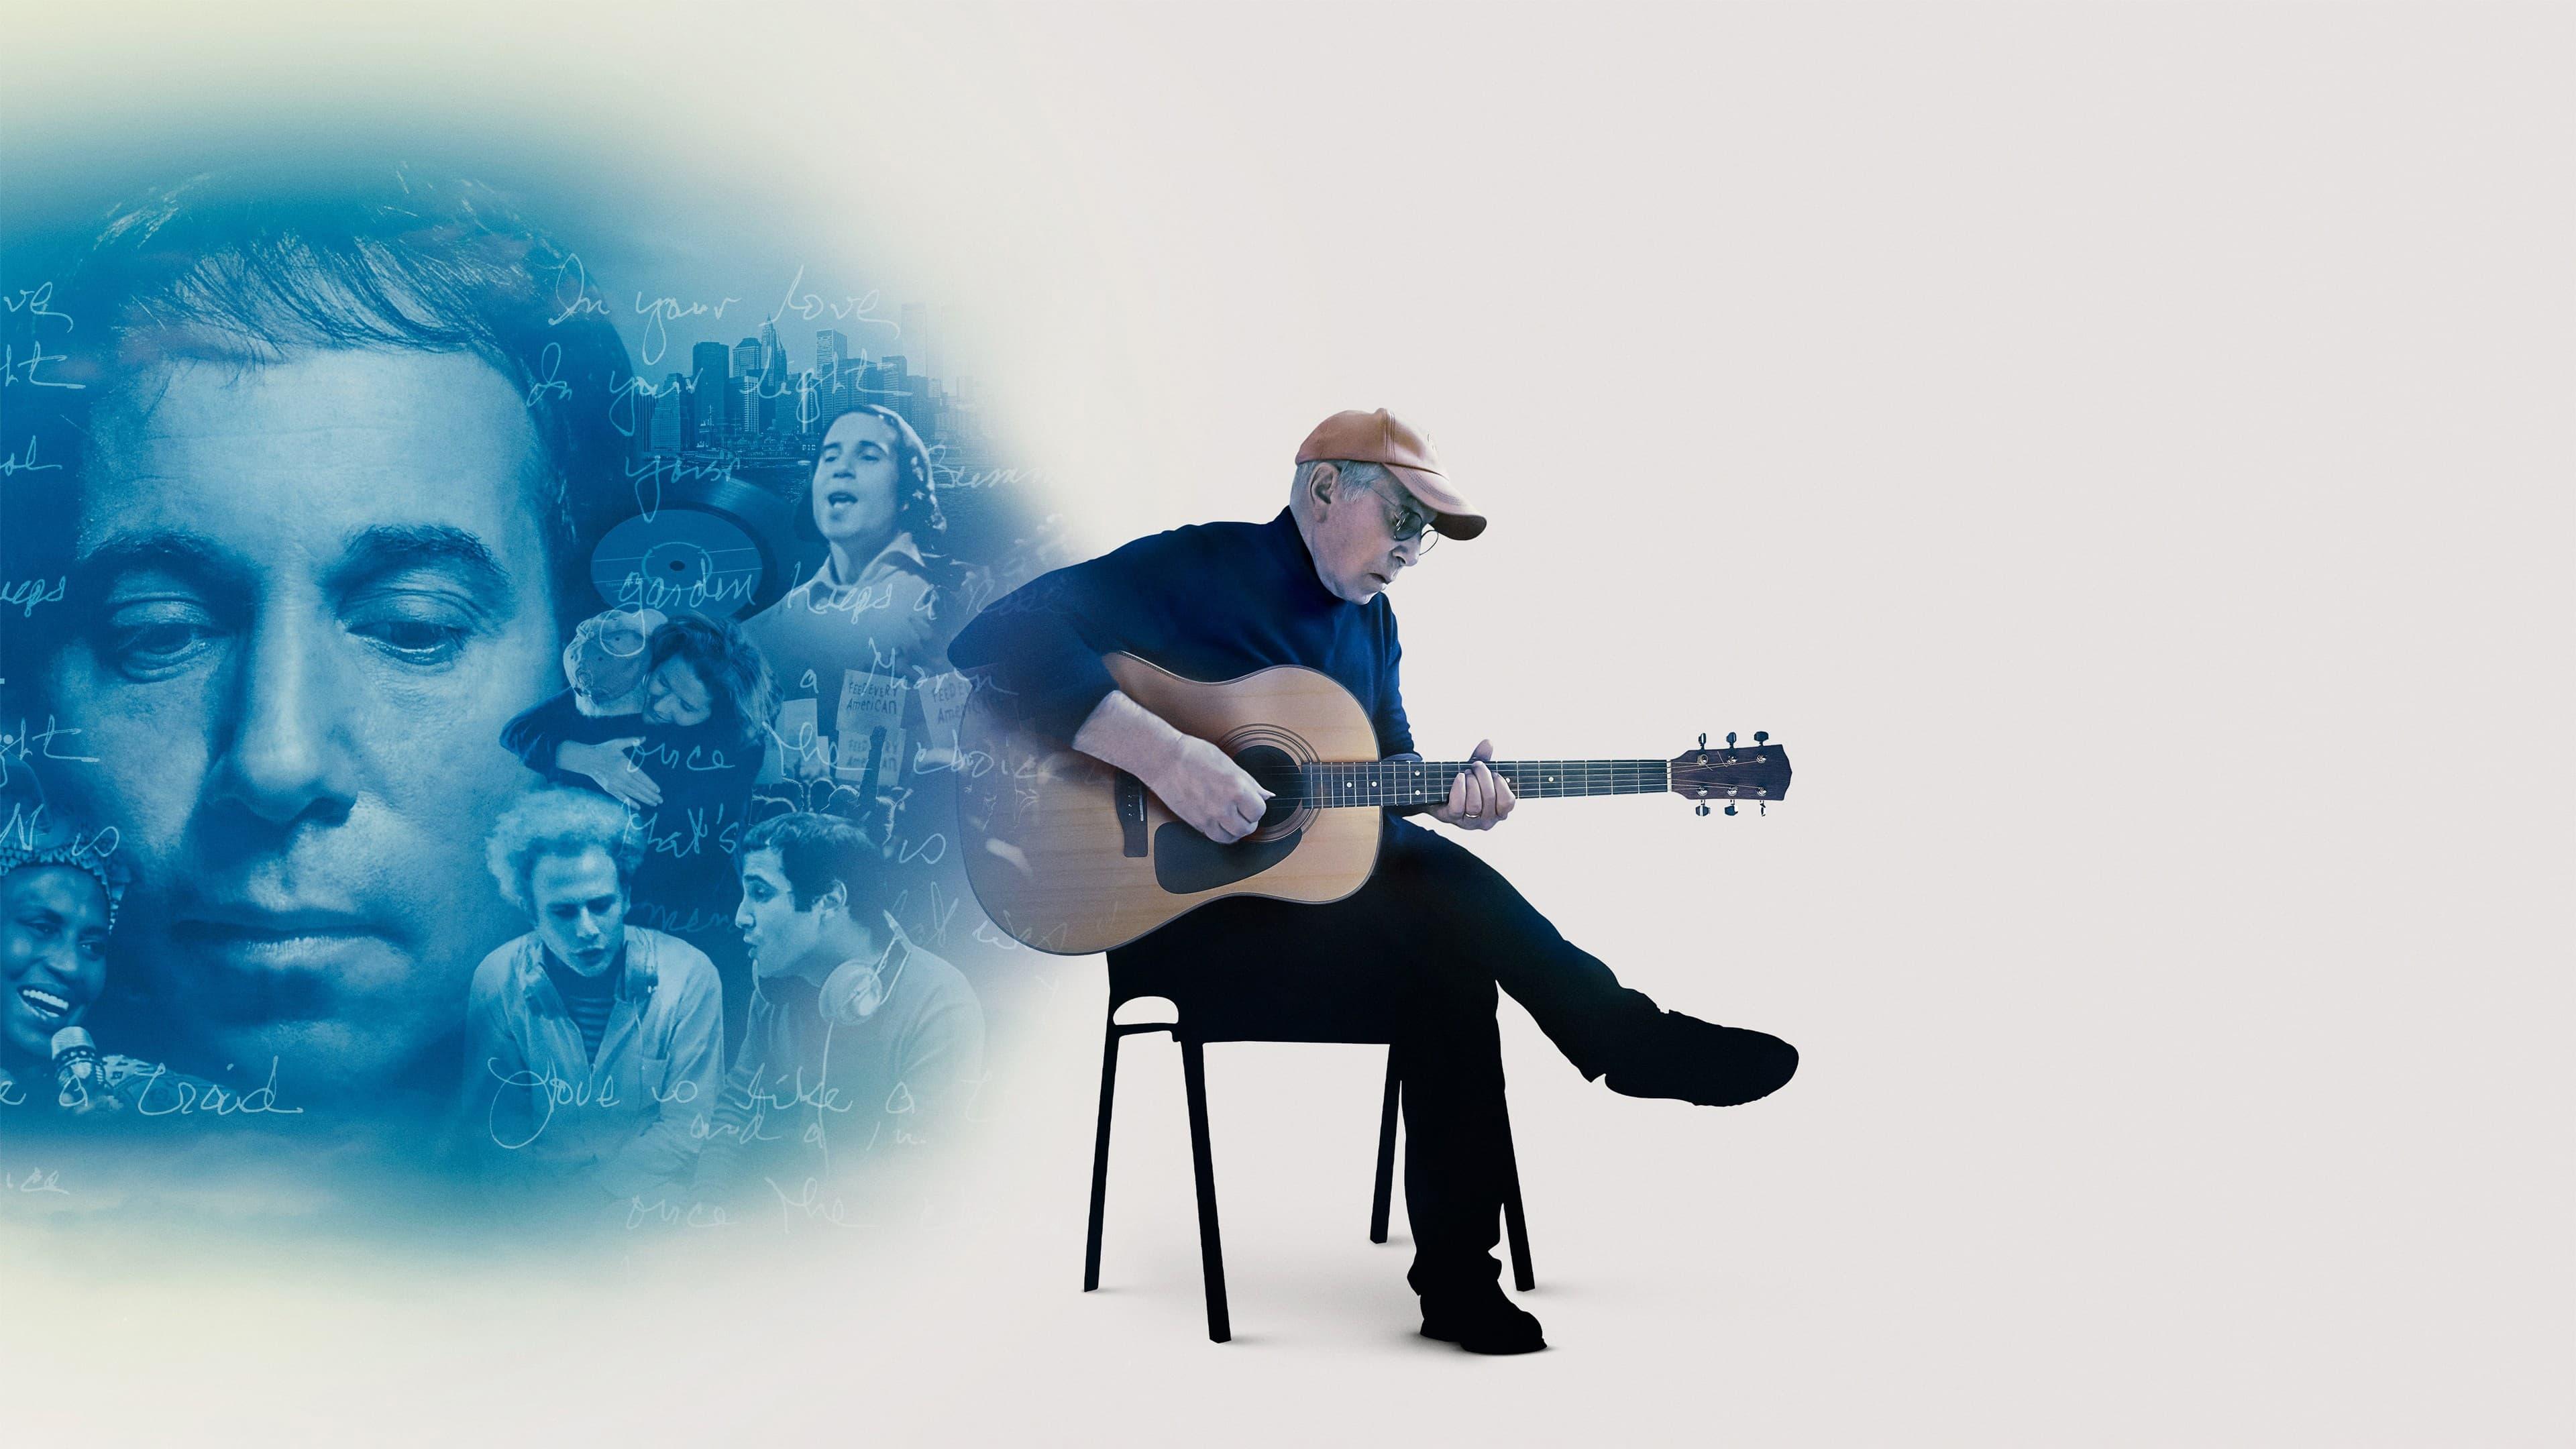 In Restless Dreams: The Music of Paul Simon backdrop